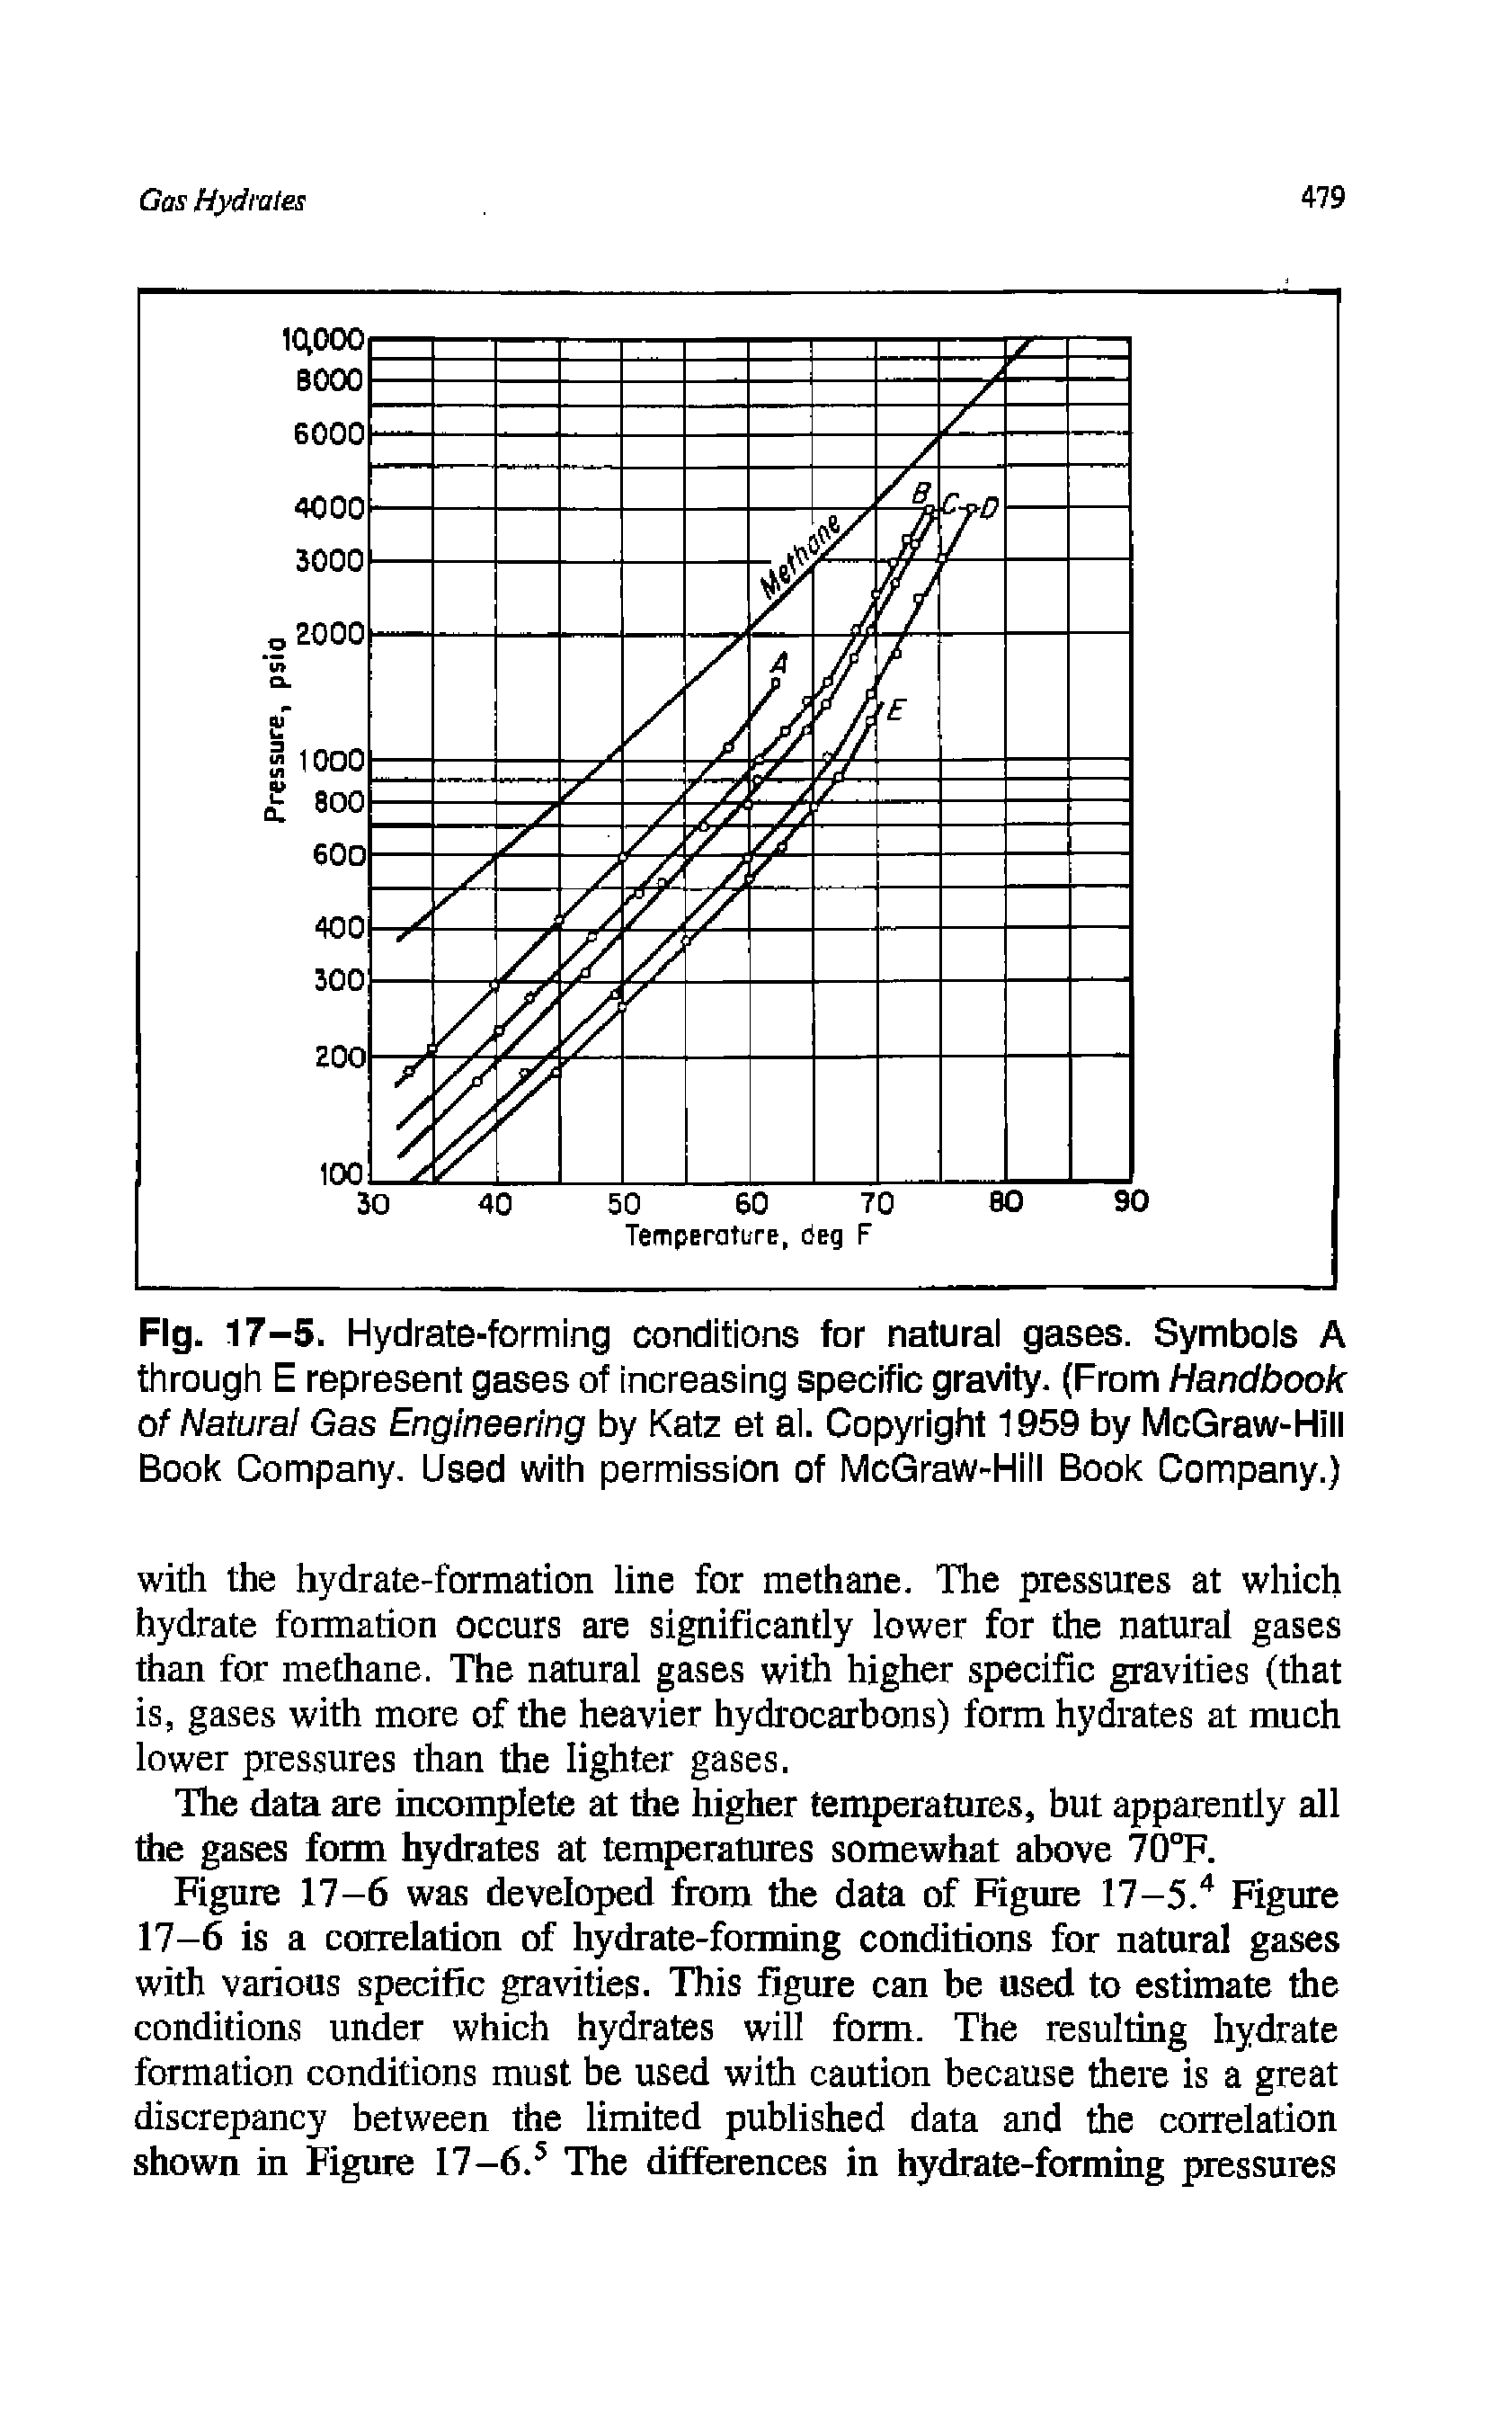 Figure 17-6 was developed from the data of Figure 17-5.4 Figure 17—6 is a correlation of hydrate-forming conditions for natural gases with various specific gravities. This figure can be used to estimate the conditions under which hydrates will form. The resulting hydrate formation conditions must be used with caution because there is a great discrepancy between the limited published data and the correlation shown in Figure 17-6.5 The differences in hydrate-forming pressures...